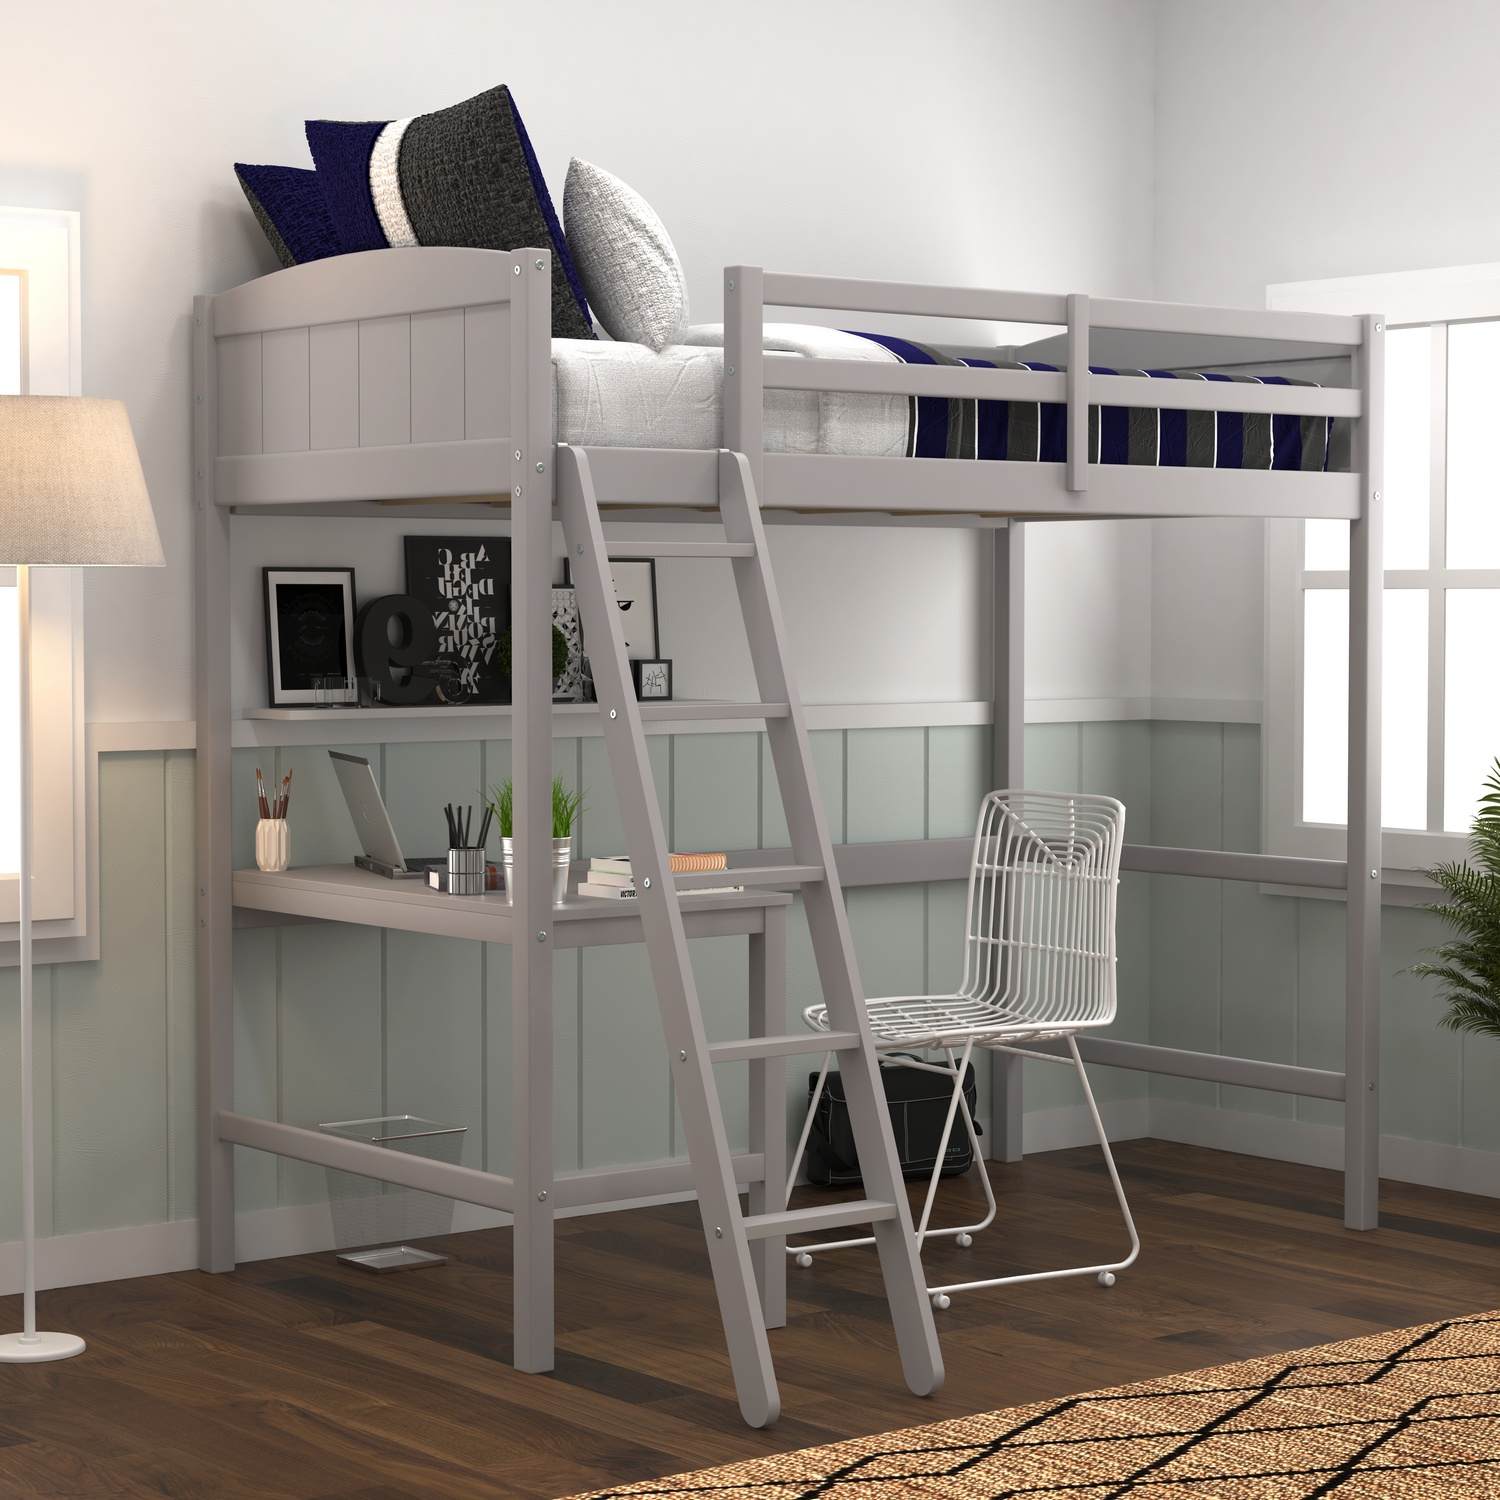 Hillsdale Alexis Wood Arch Twin Loft Bed with Desk - Gray